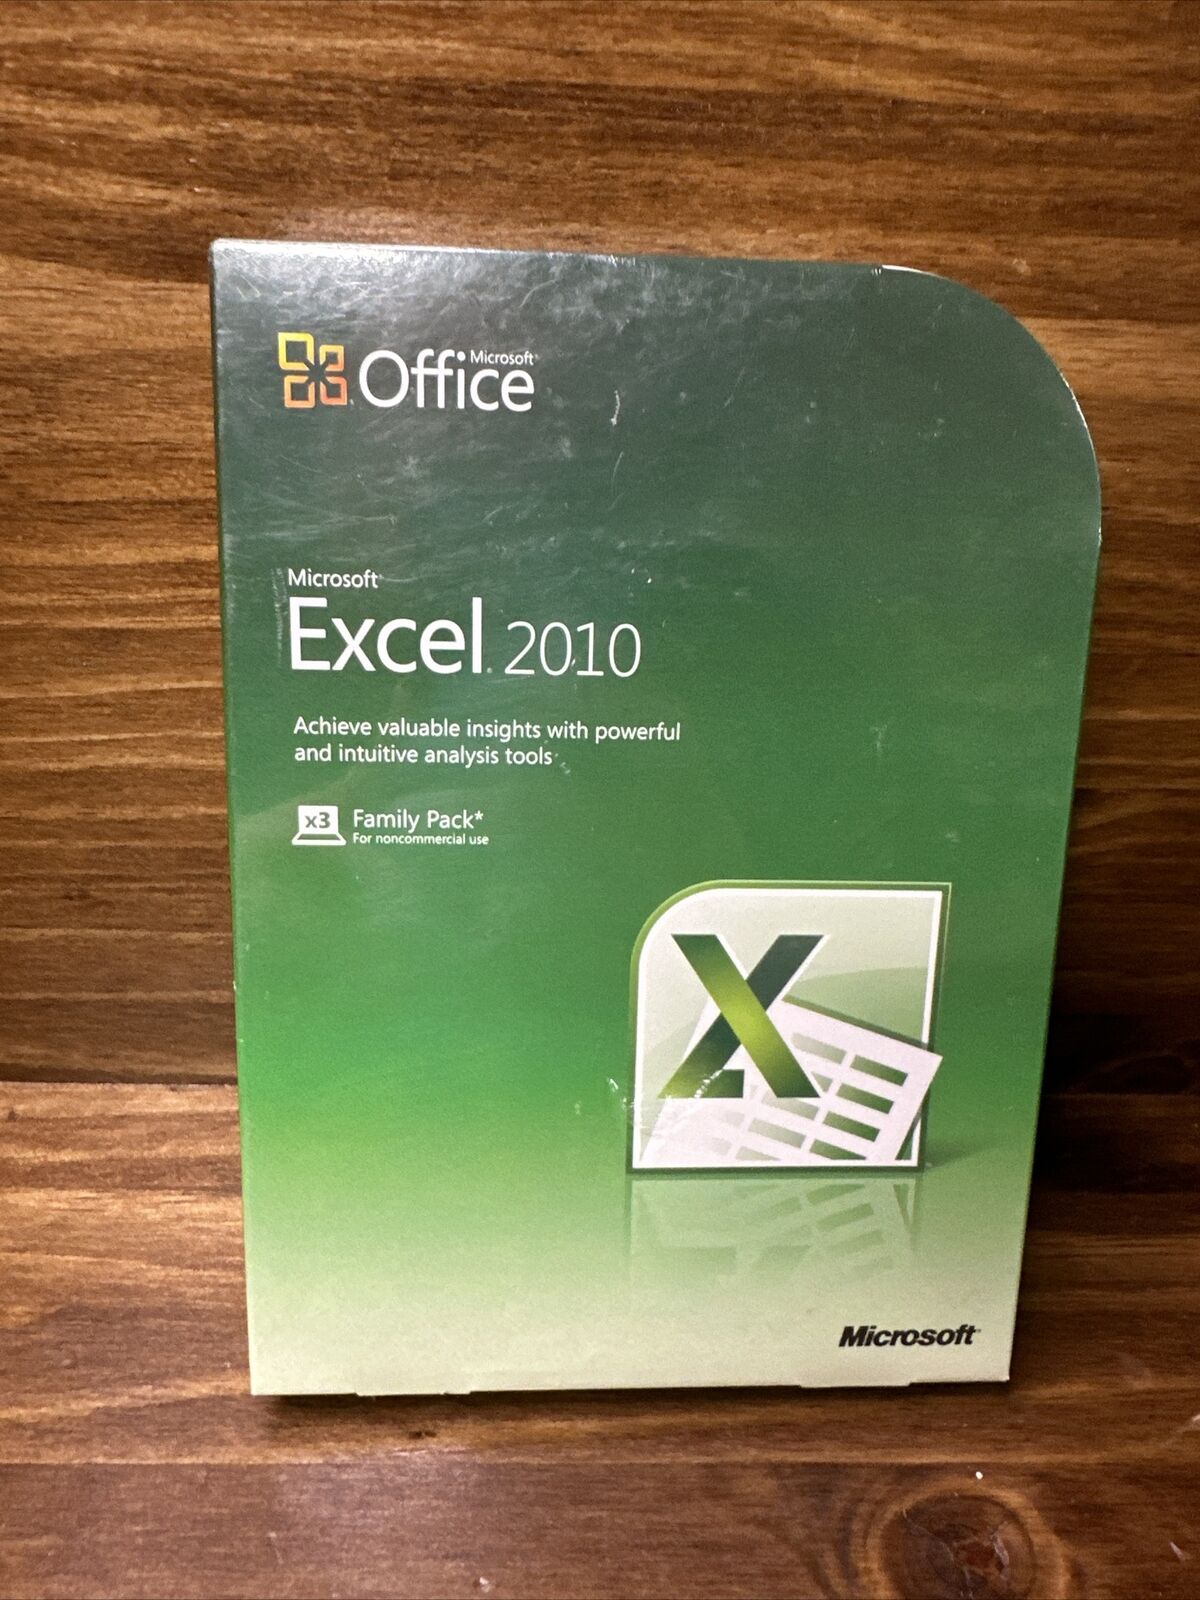 Microsoft MS Office Excel 2010 Licensed for 3 PCs Full English Retail=SEALED BOX